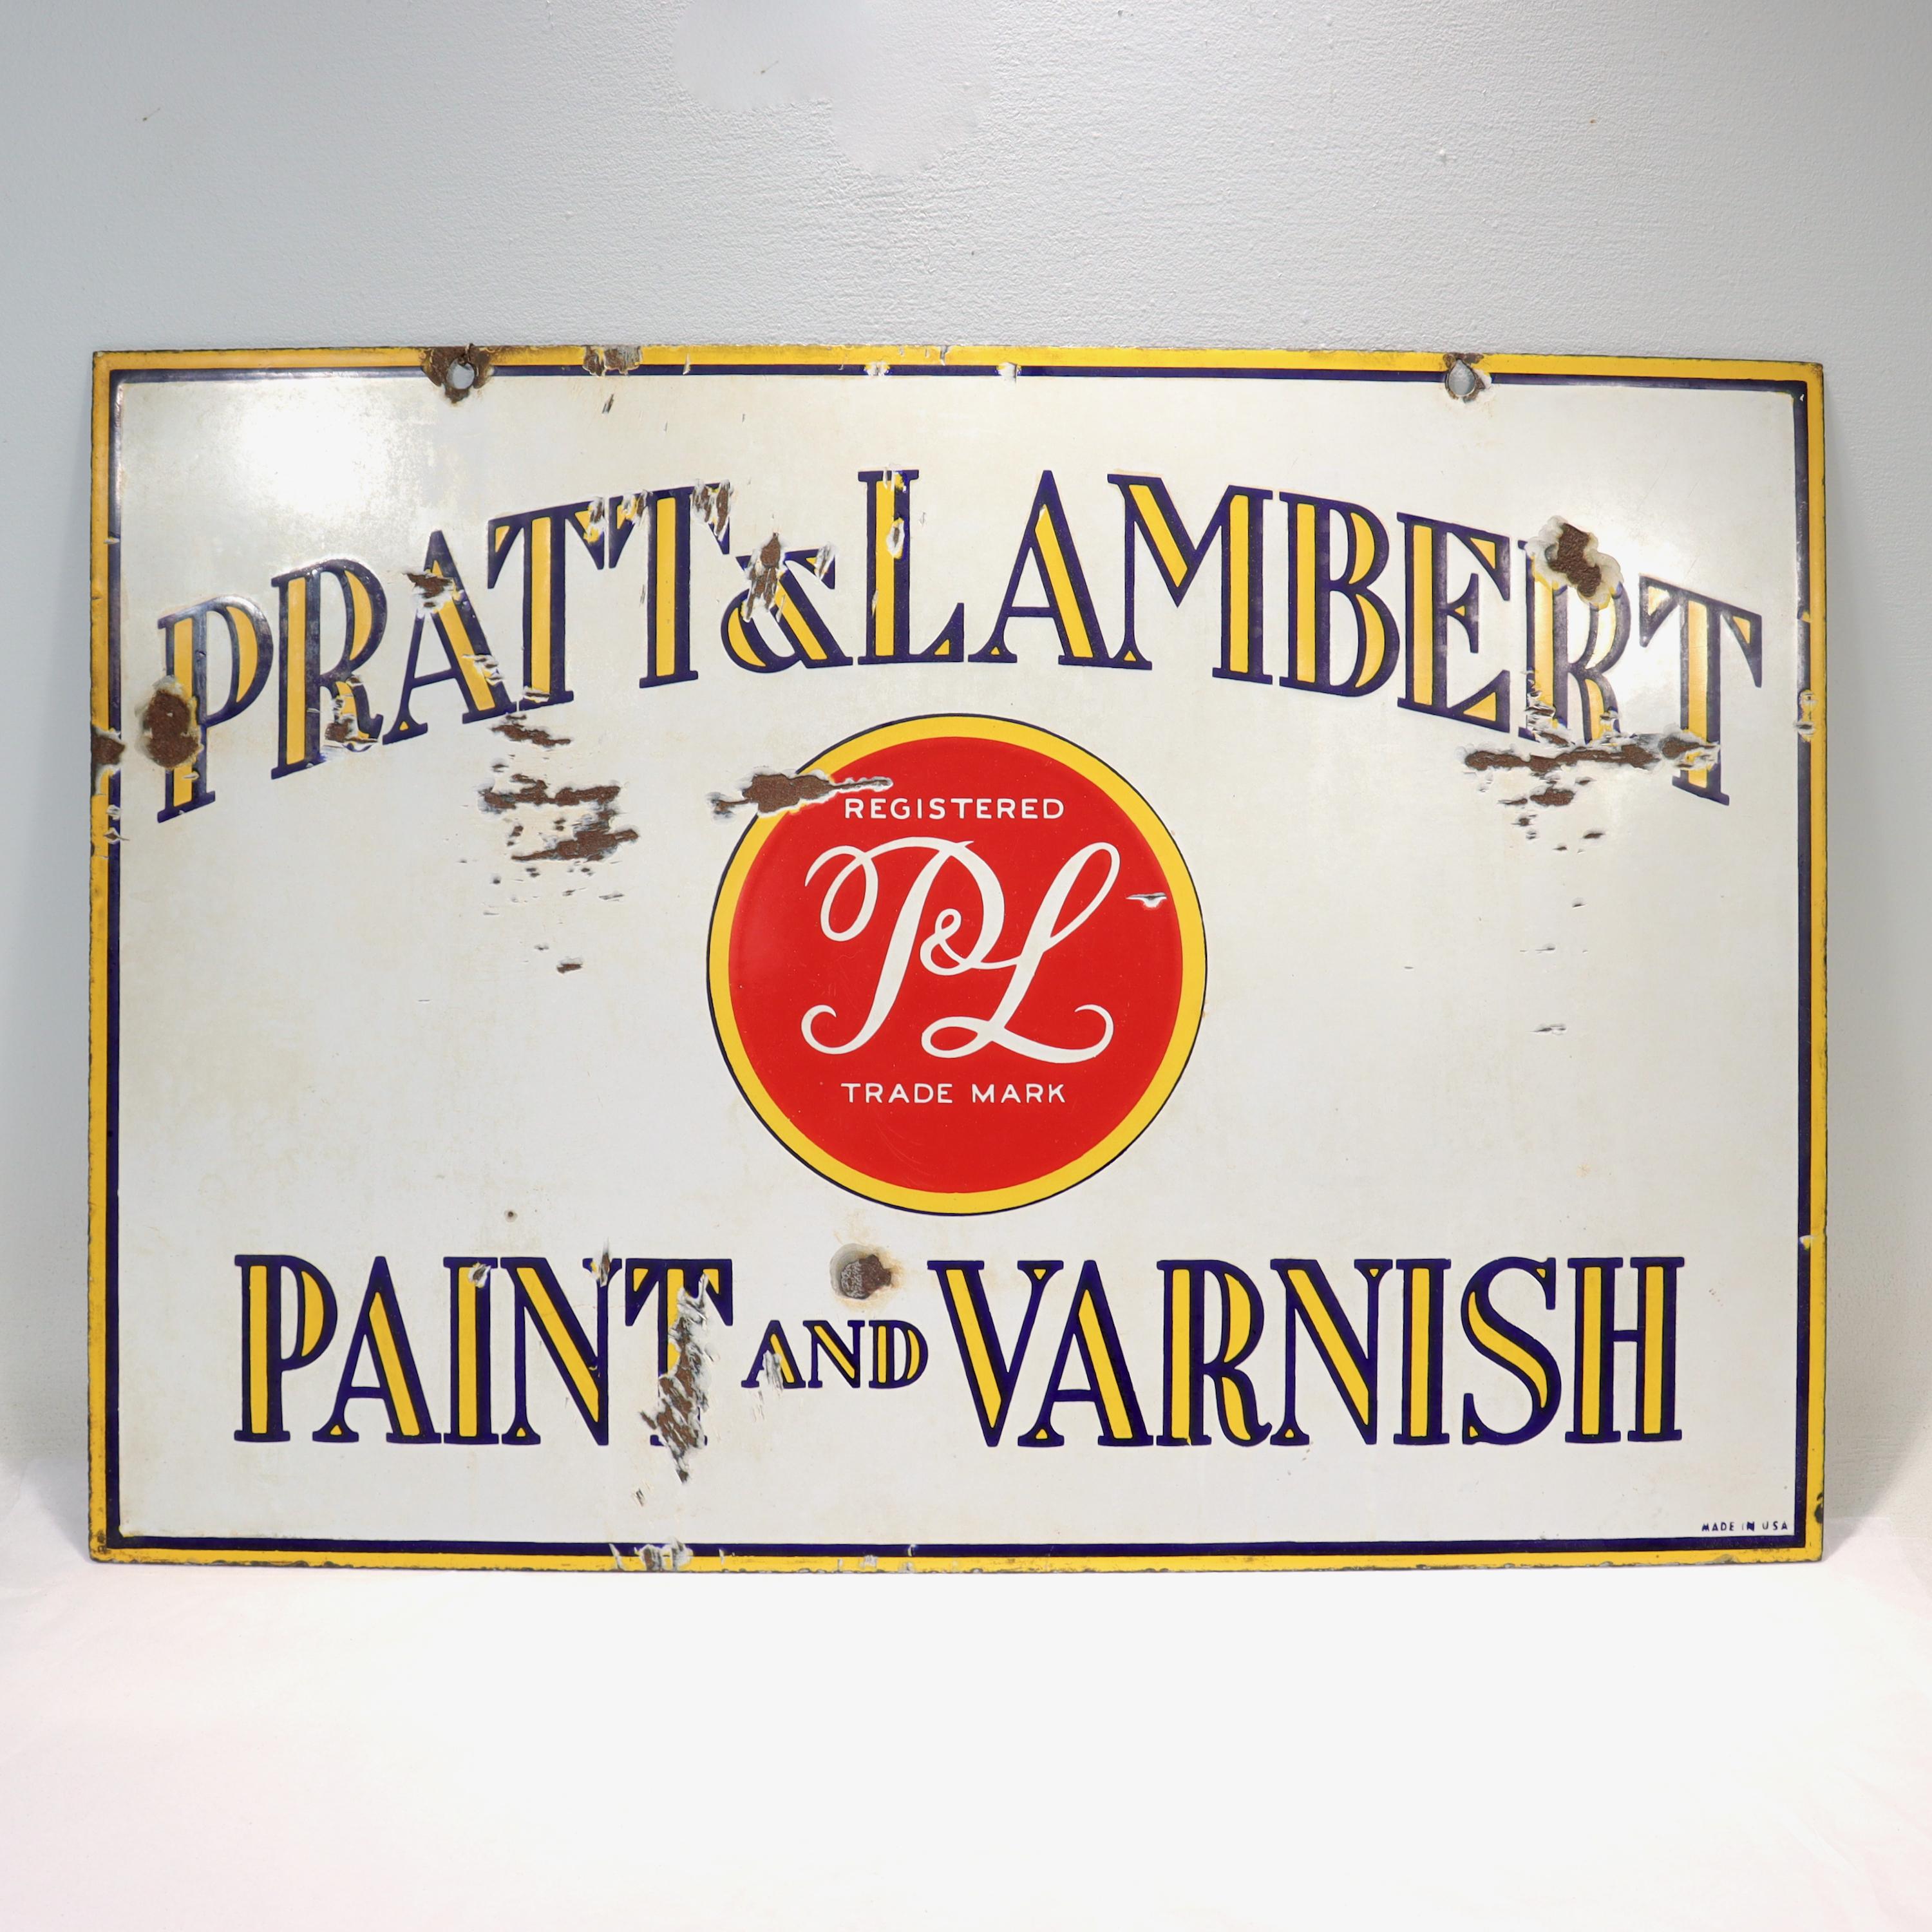 A fine vintage double-sided enamel advertising sign.

For the famed Pratt & Lambert paint company. 

With yellow & red decoration on a white ground.

The text reads: 'PRATT & LAMBERT PAINT AND VARNISH'

Simply a great vintage sign!